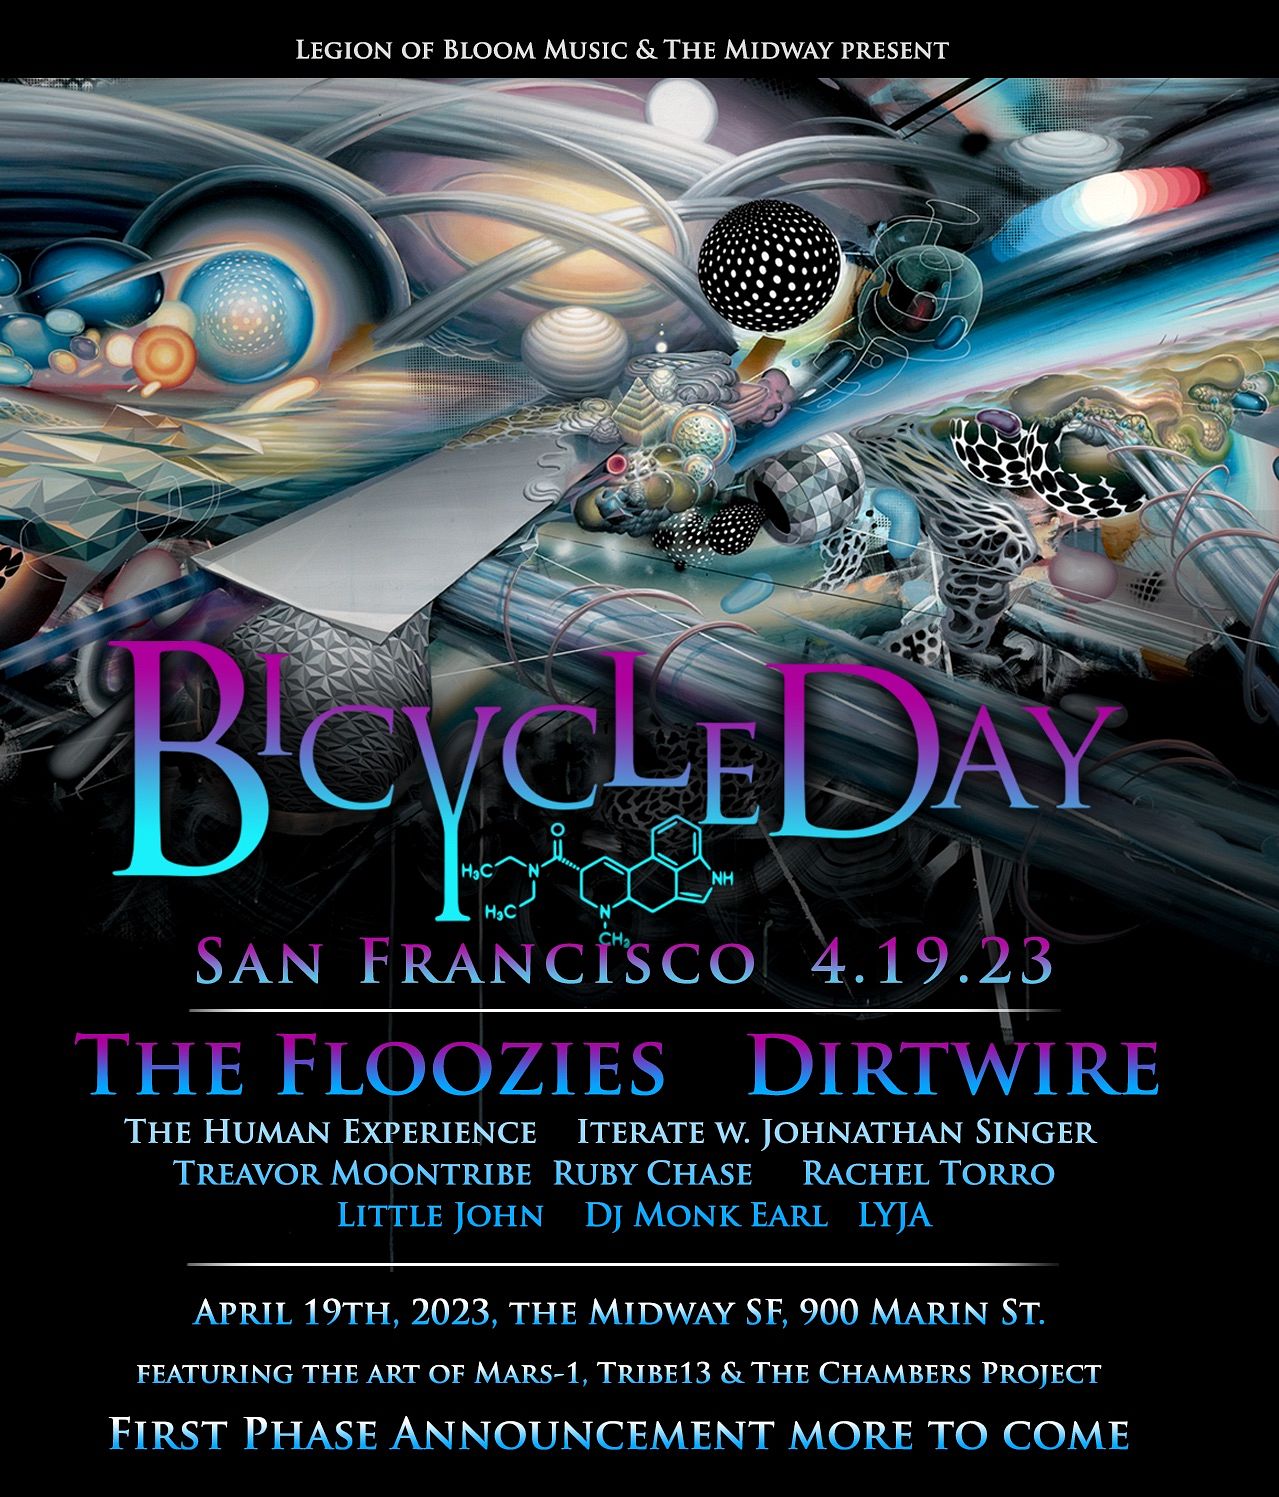 Bicycle Day 2023 The Floozies, Dirtwire & More Tickets at The Midway